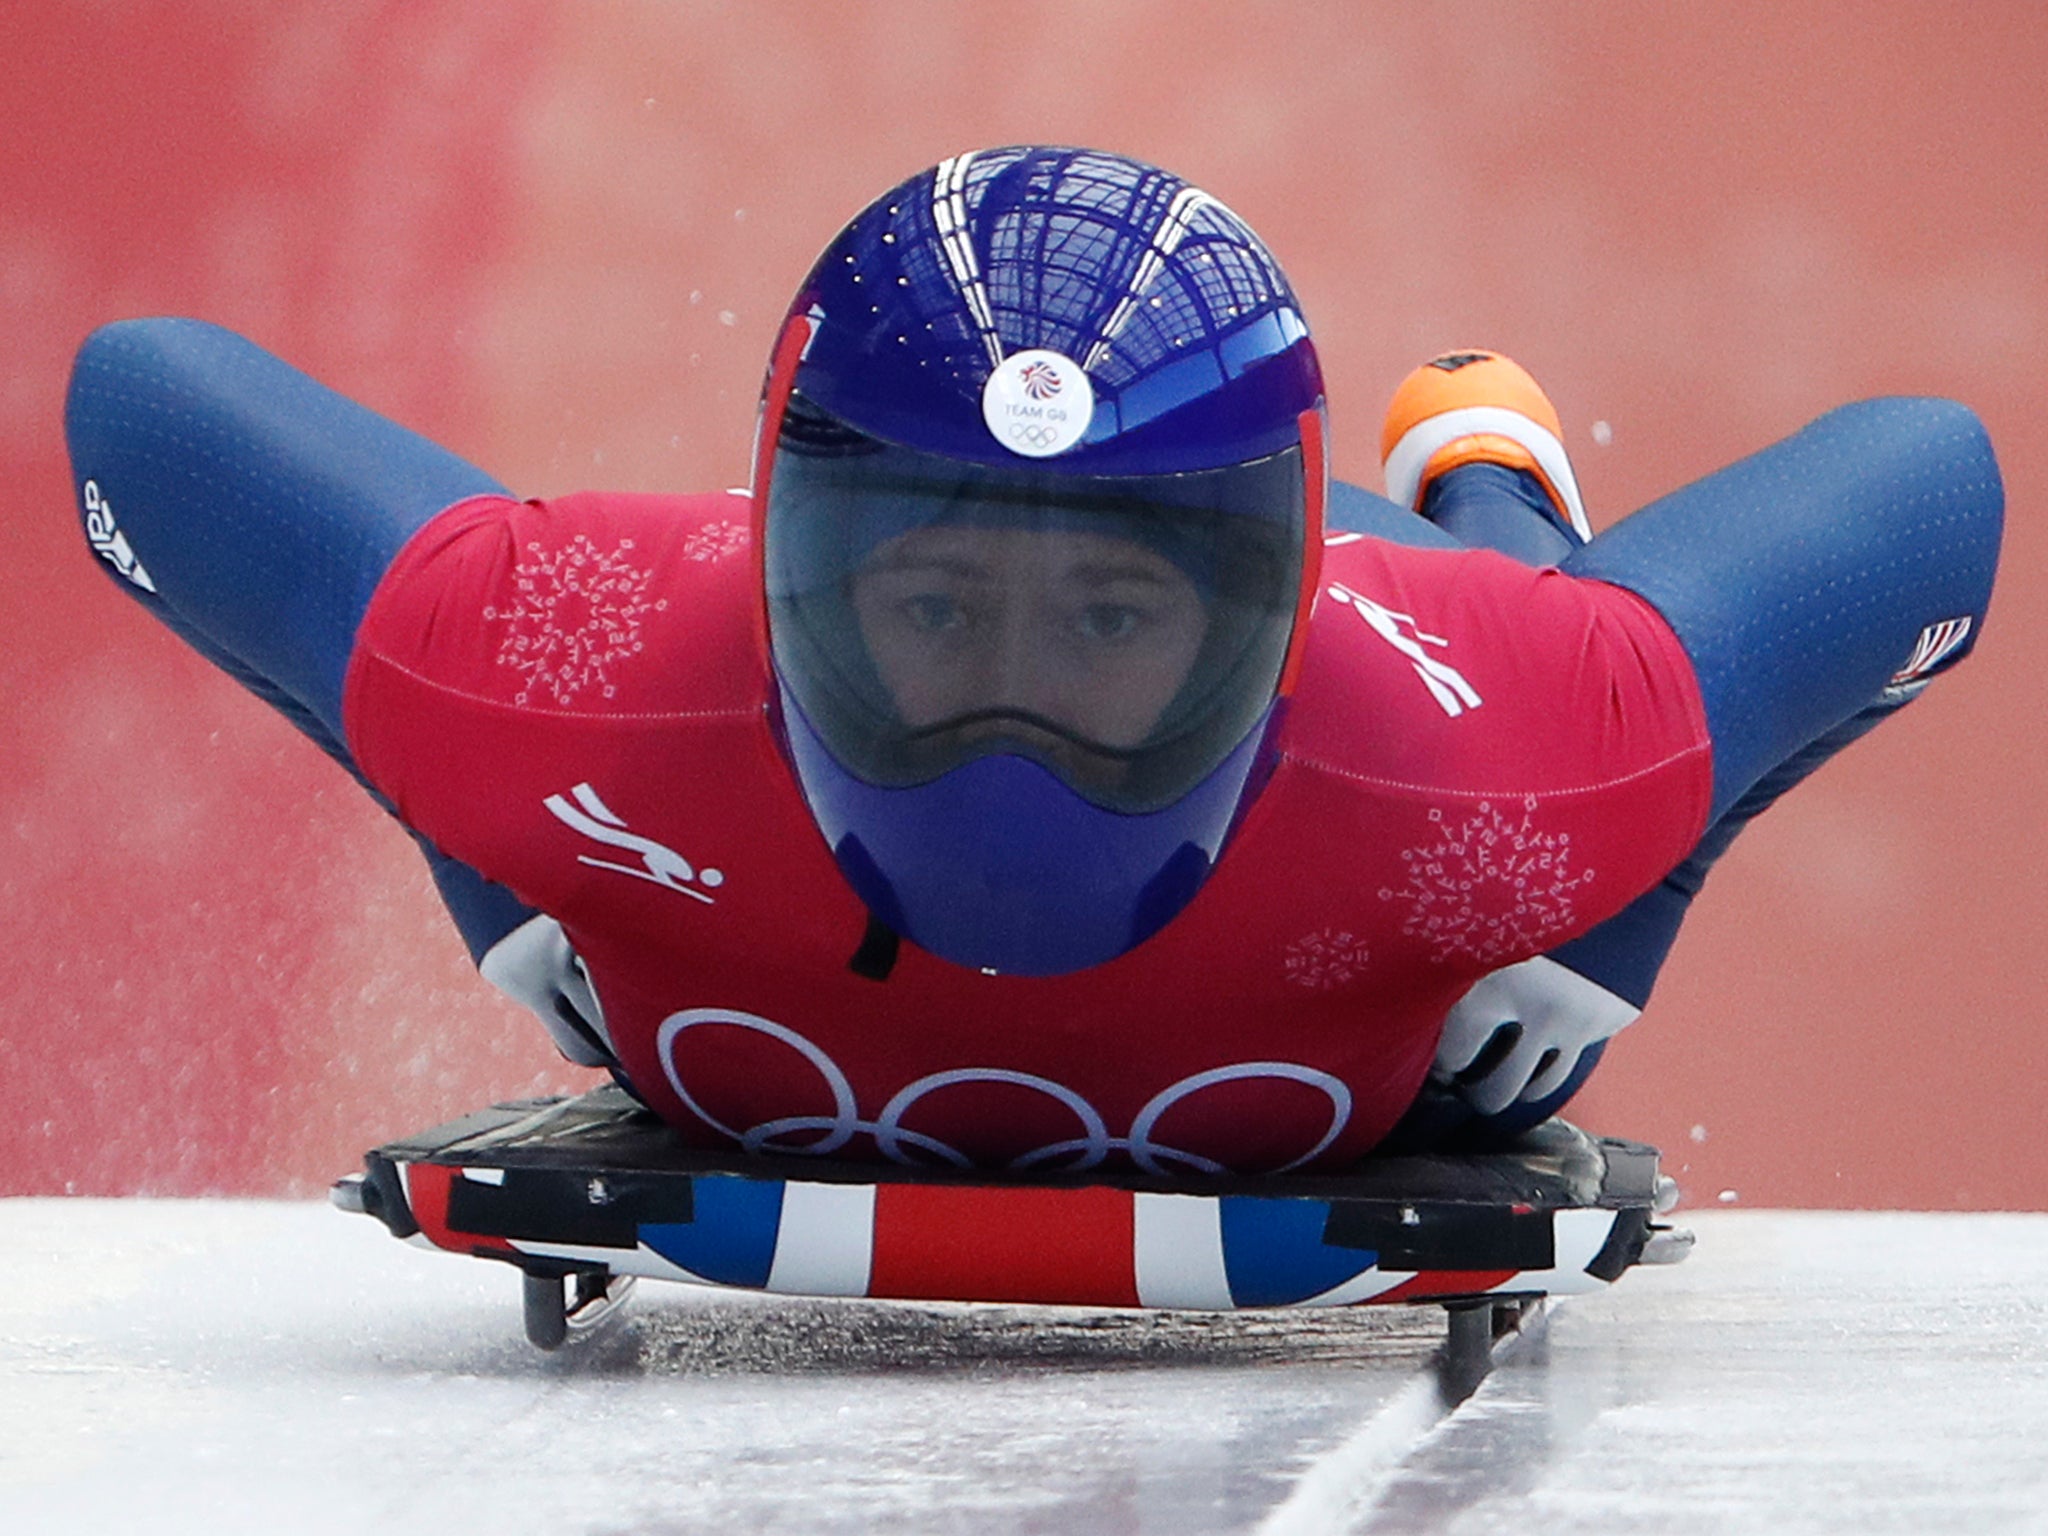 Yarnold is one of the favourites for gold in the skeleton this weekend